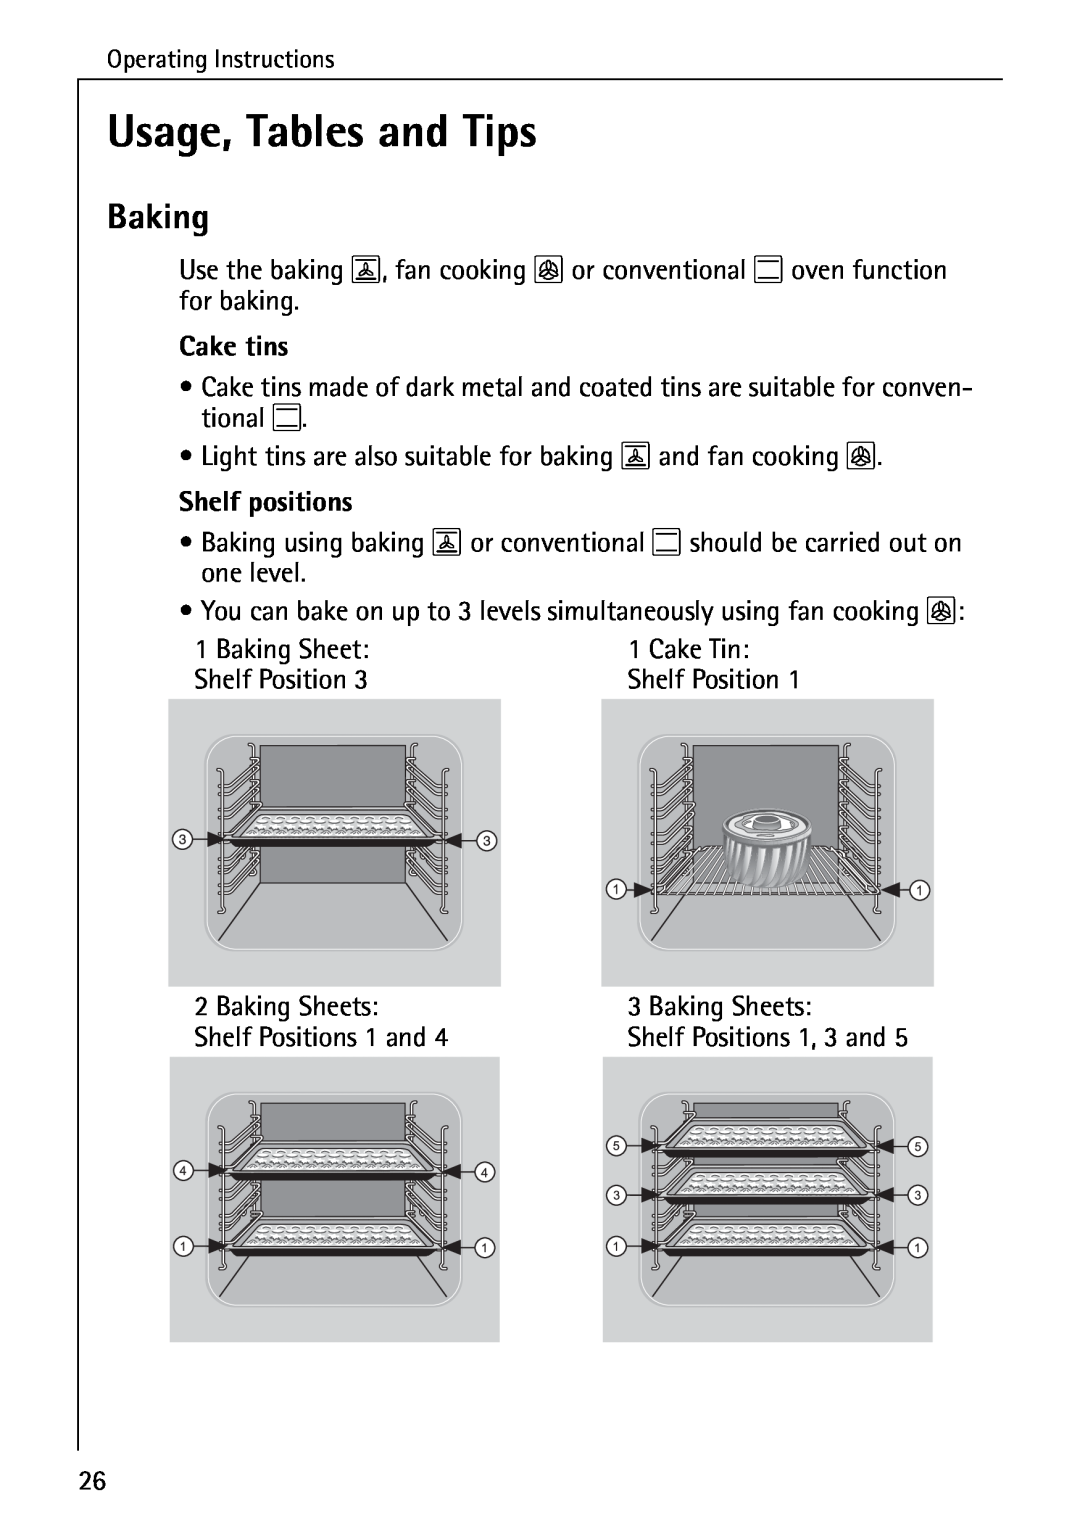 Electrolux B4140-1 manual Usage, Tables and Tips, Baking, Cake tins, Shelf positions 